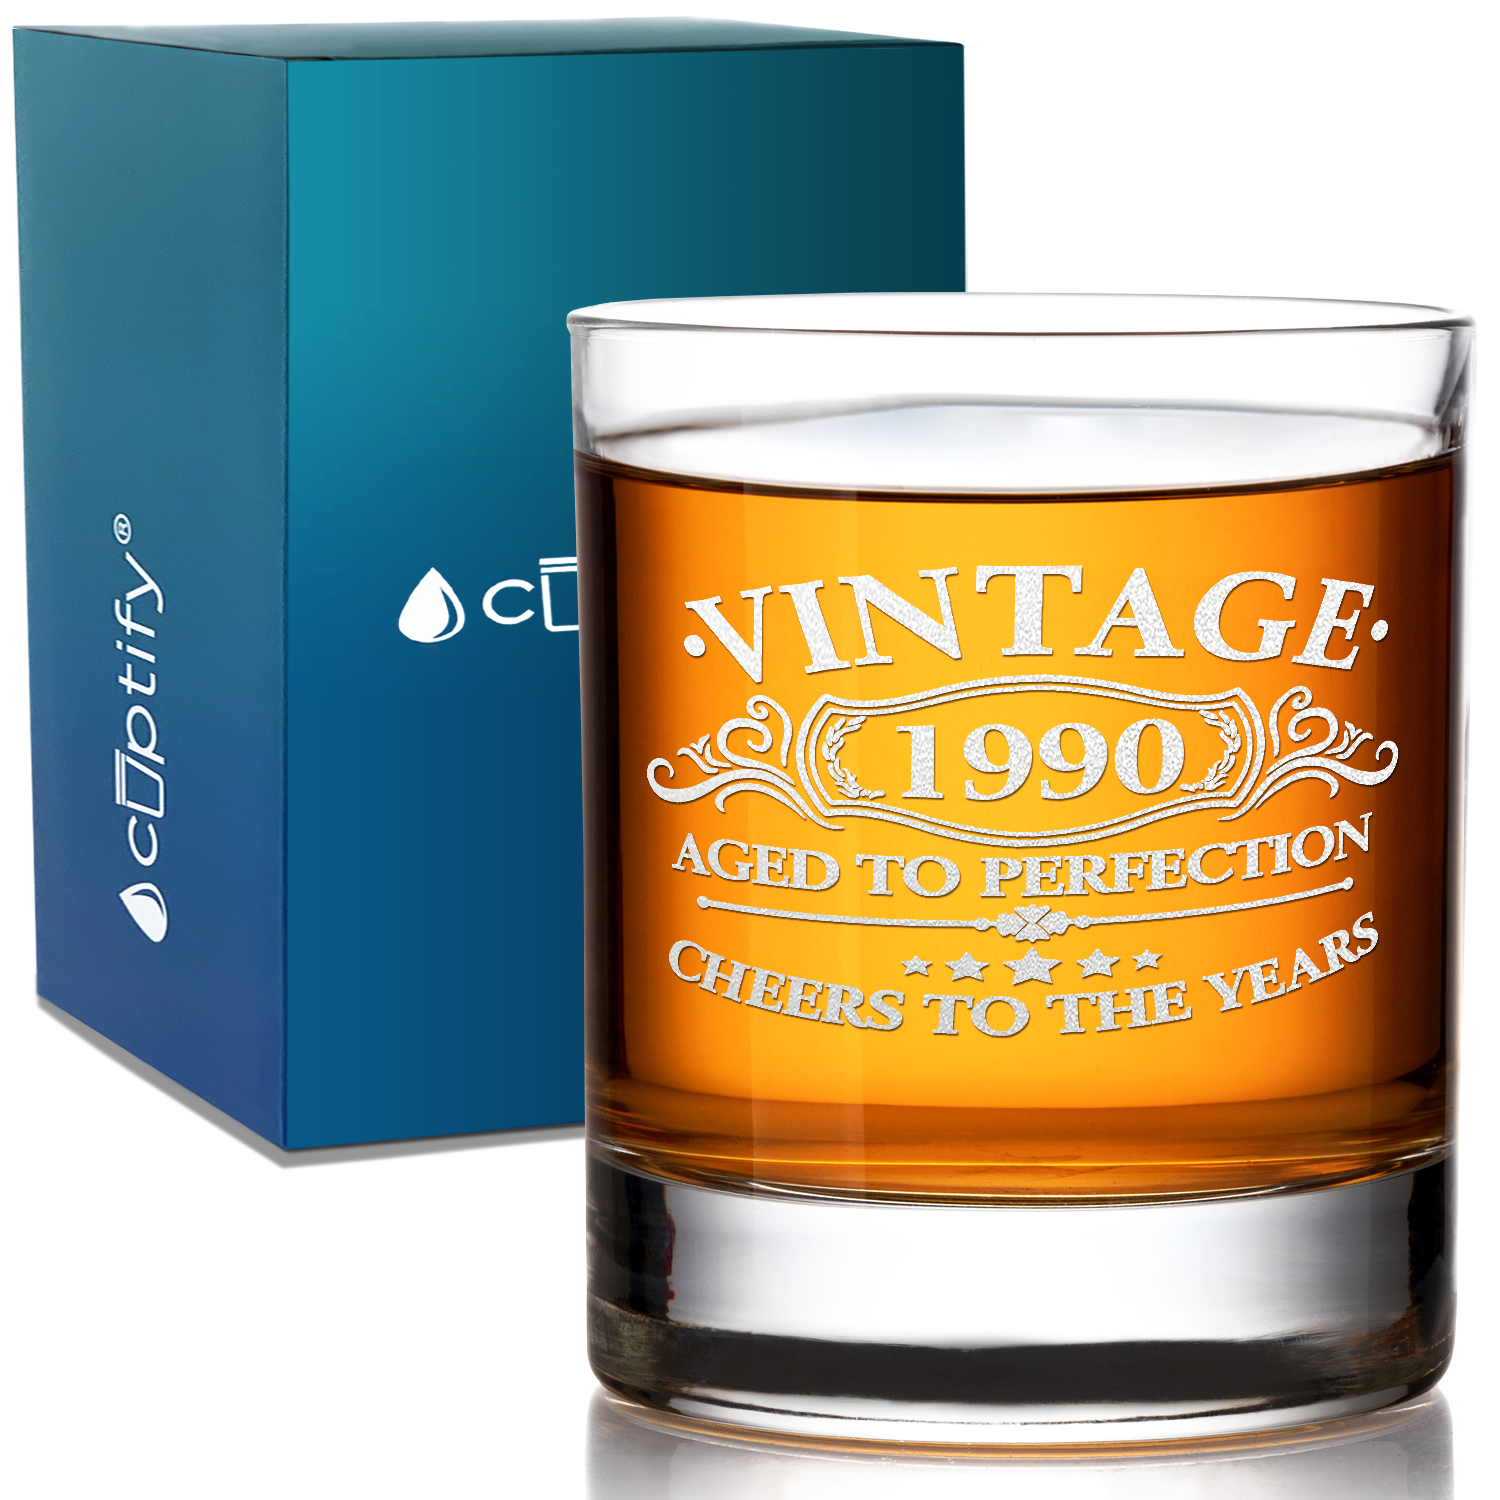 Vintage Aged To Perfection Cheers To 31 Years 1990 Laser Engraved on 10.25oz Old Fashion Glass